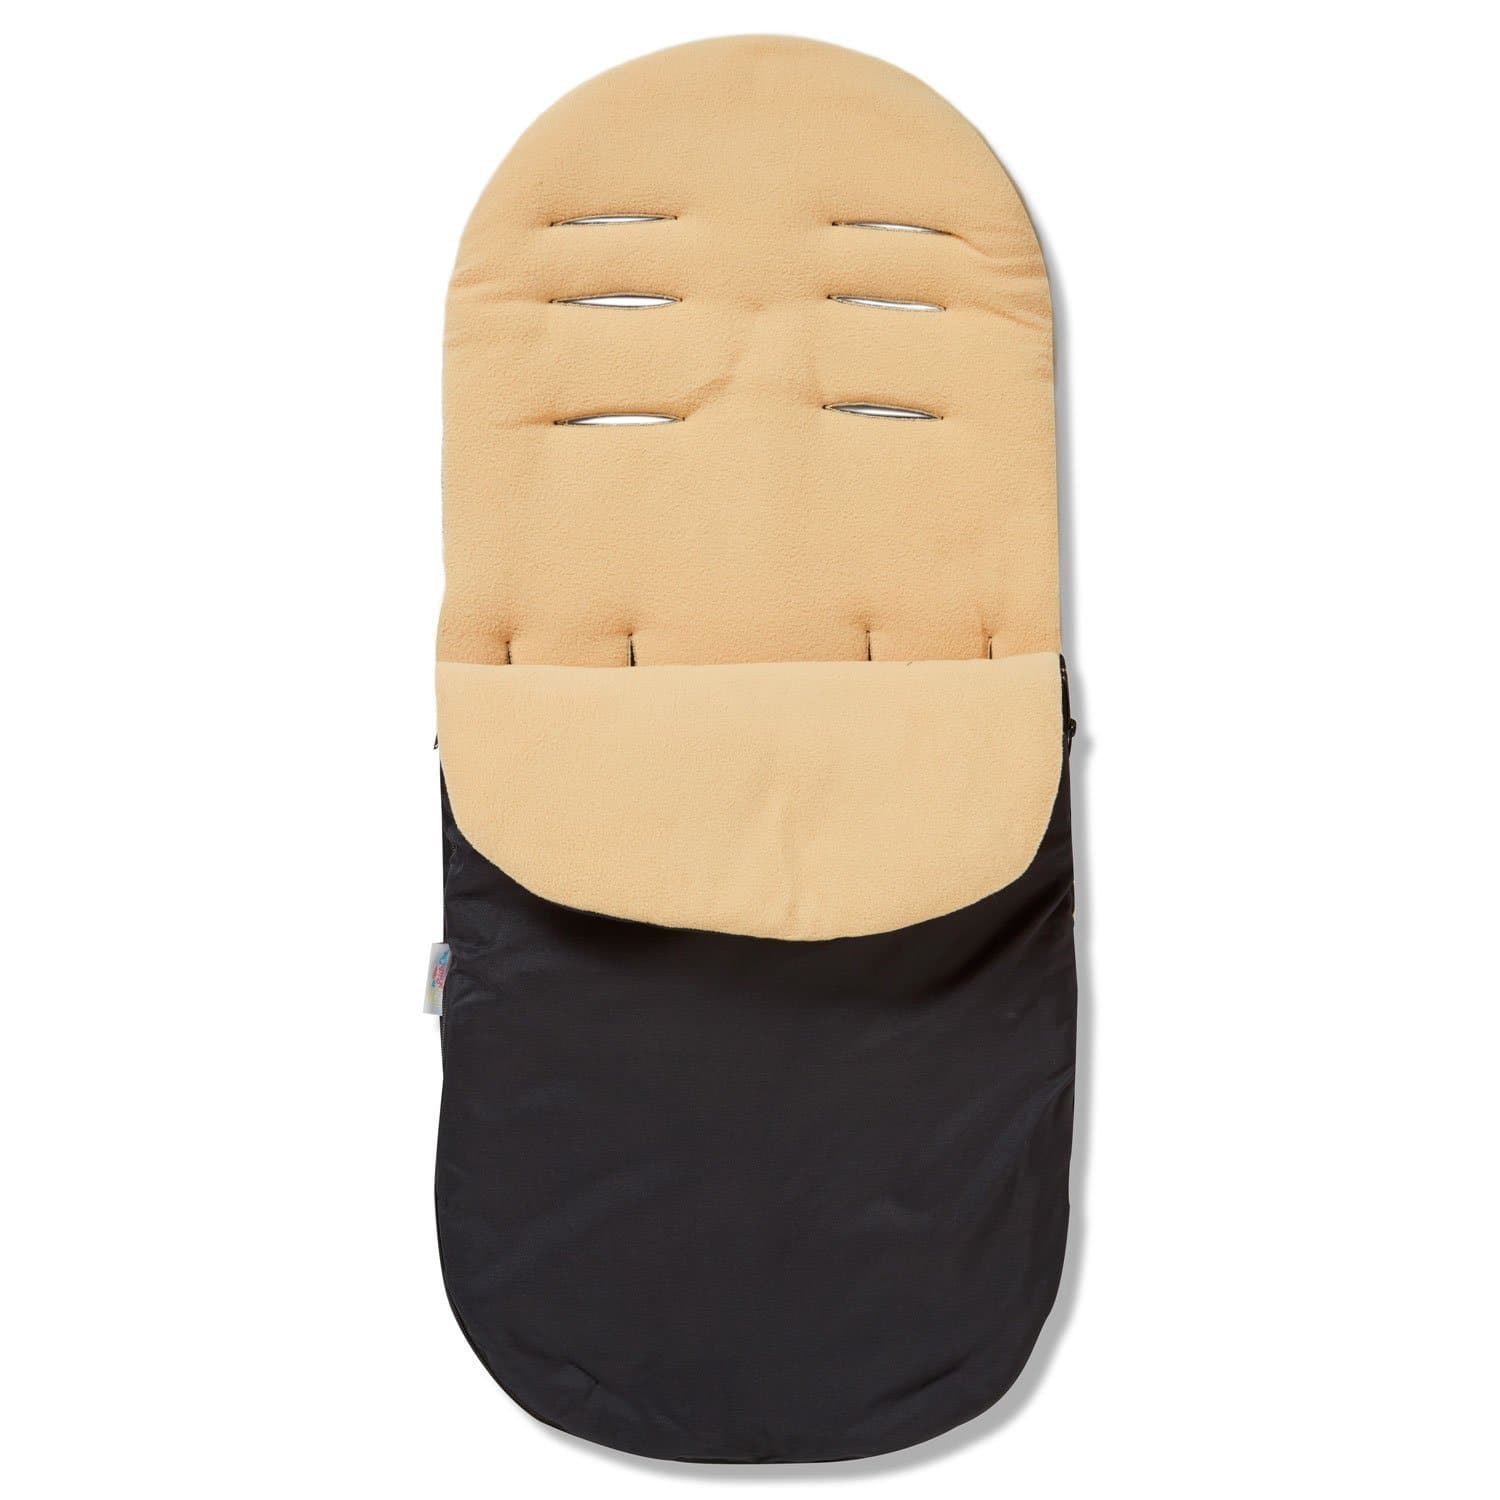 Footmuff / Cosy Toes Compatible with Mamas & Papas - Sand / Fits All Models | For Your Little One